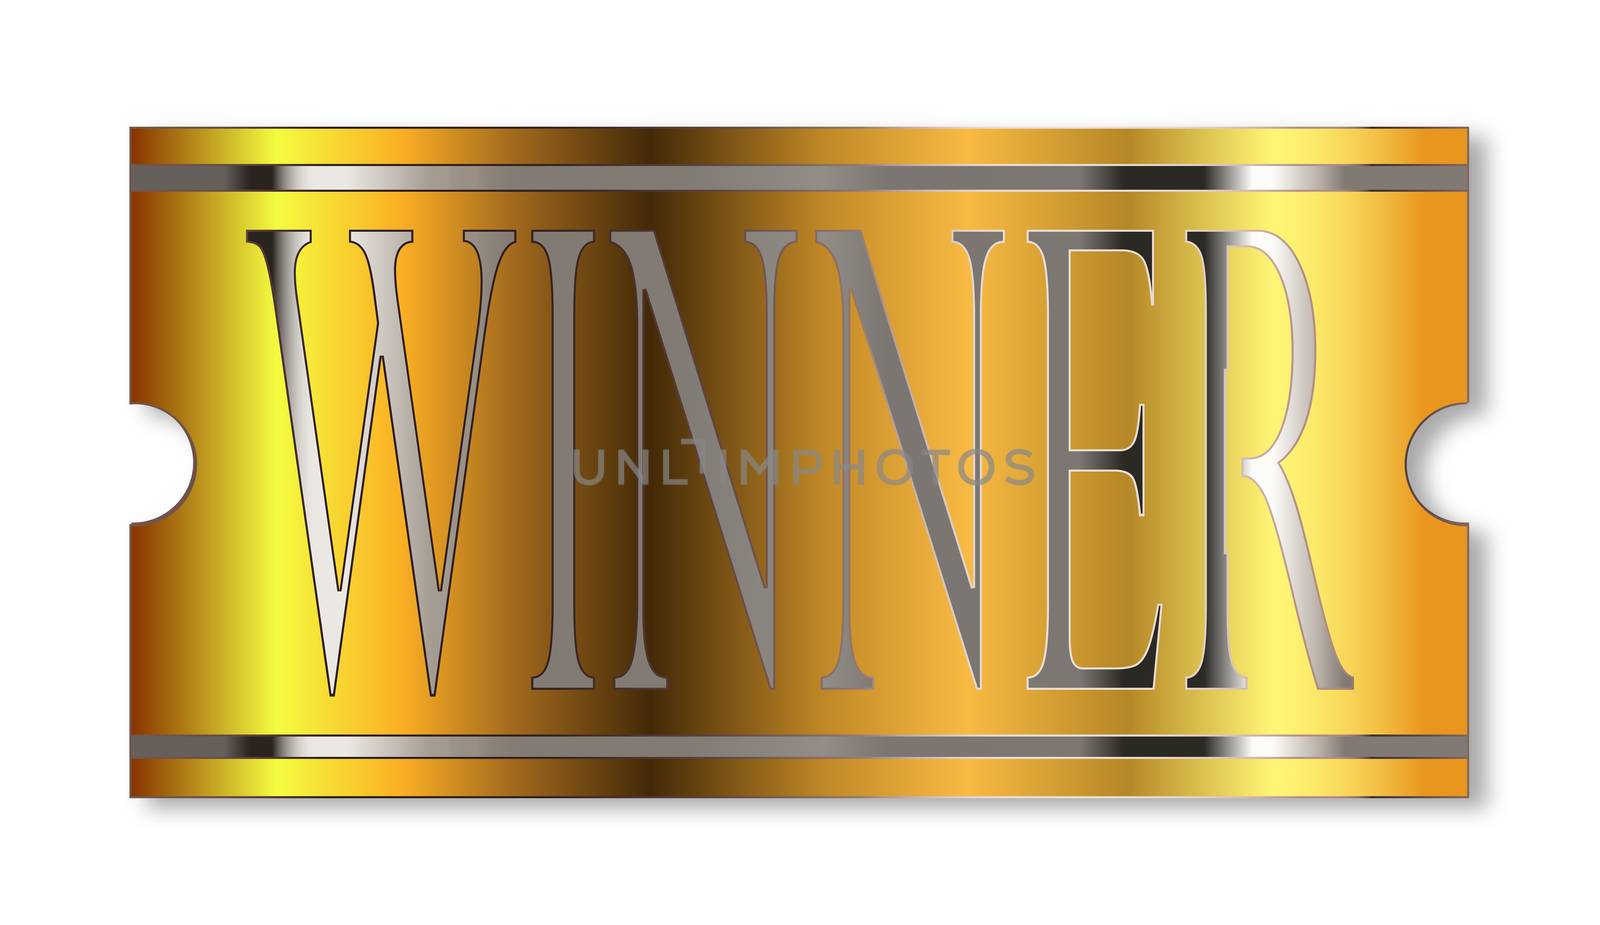 The winning ticket in gold and silver over a white background